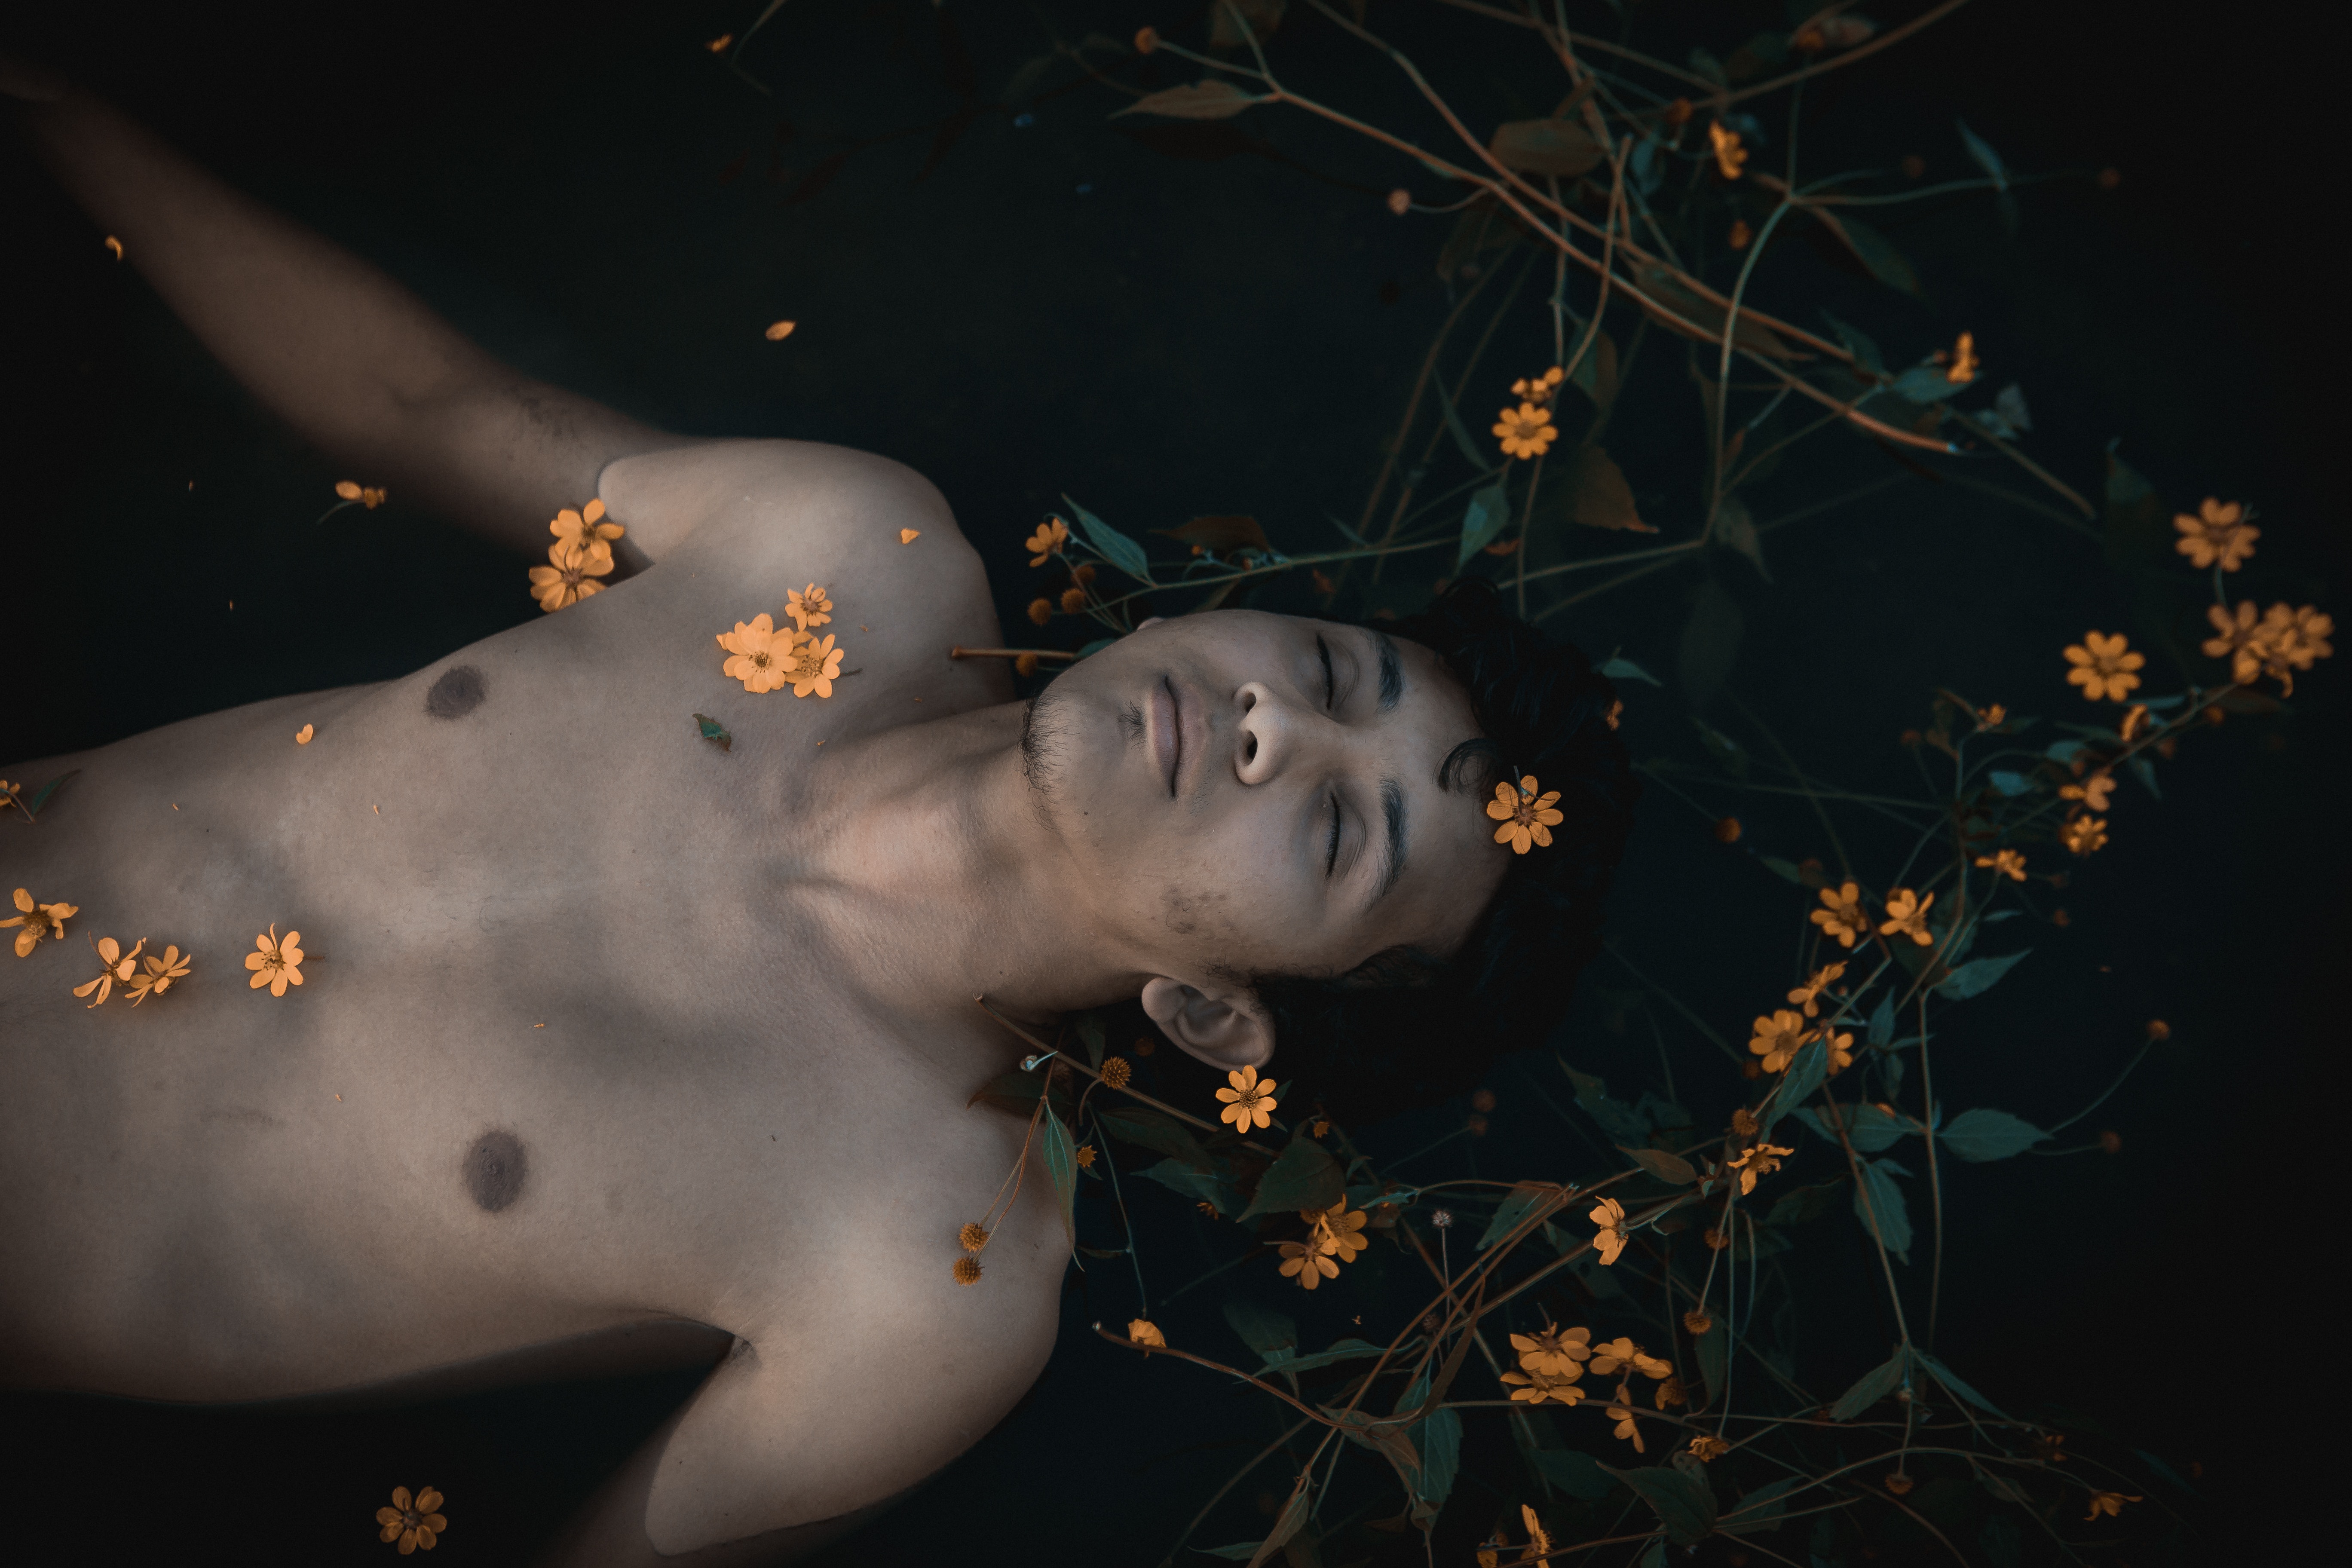 Topless man with orange flowers photo